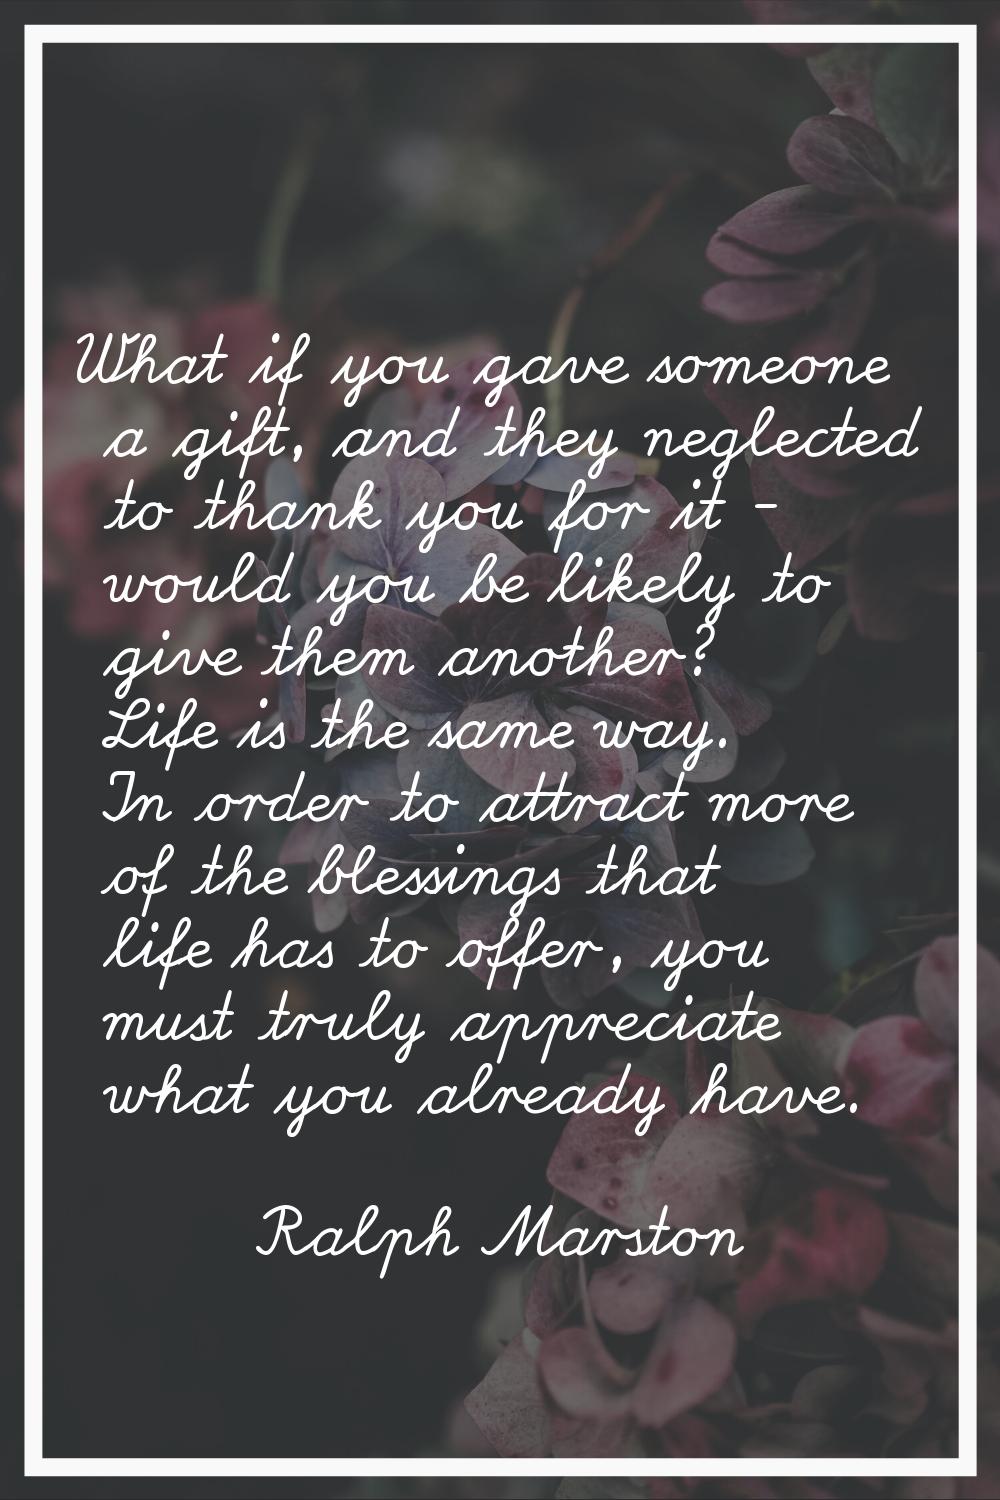 What if you gave someone a gift, and they neglected to thank you for it - would you be likely to gi